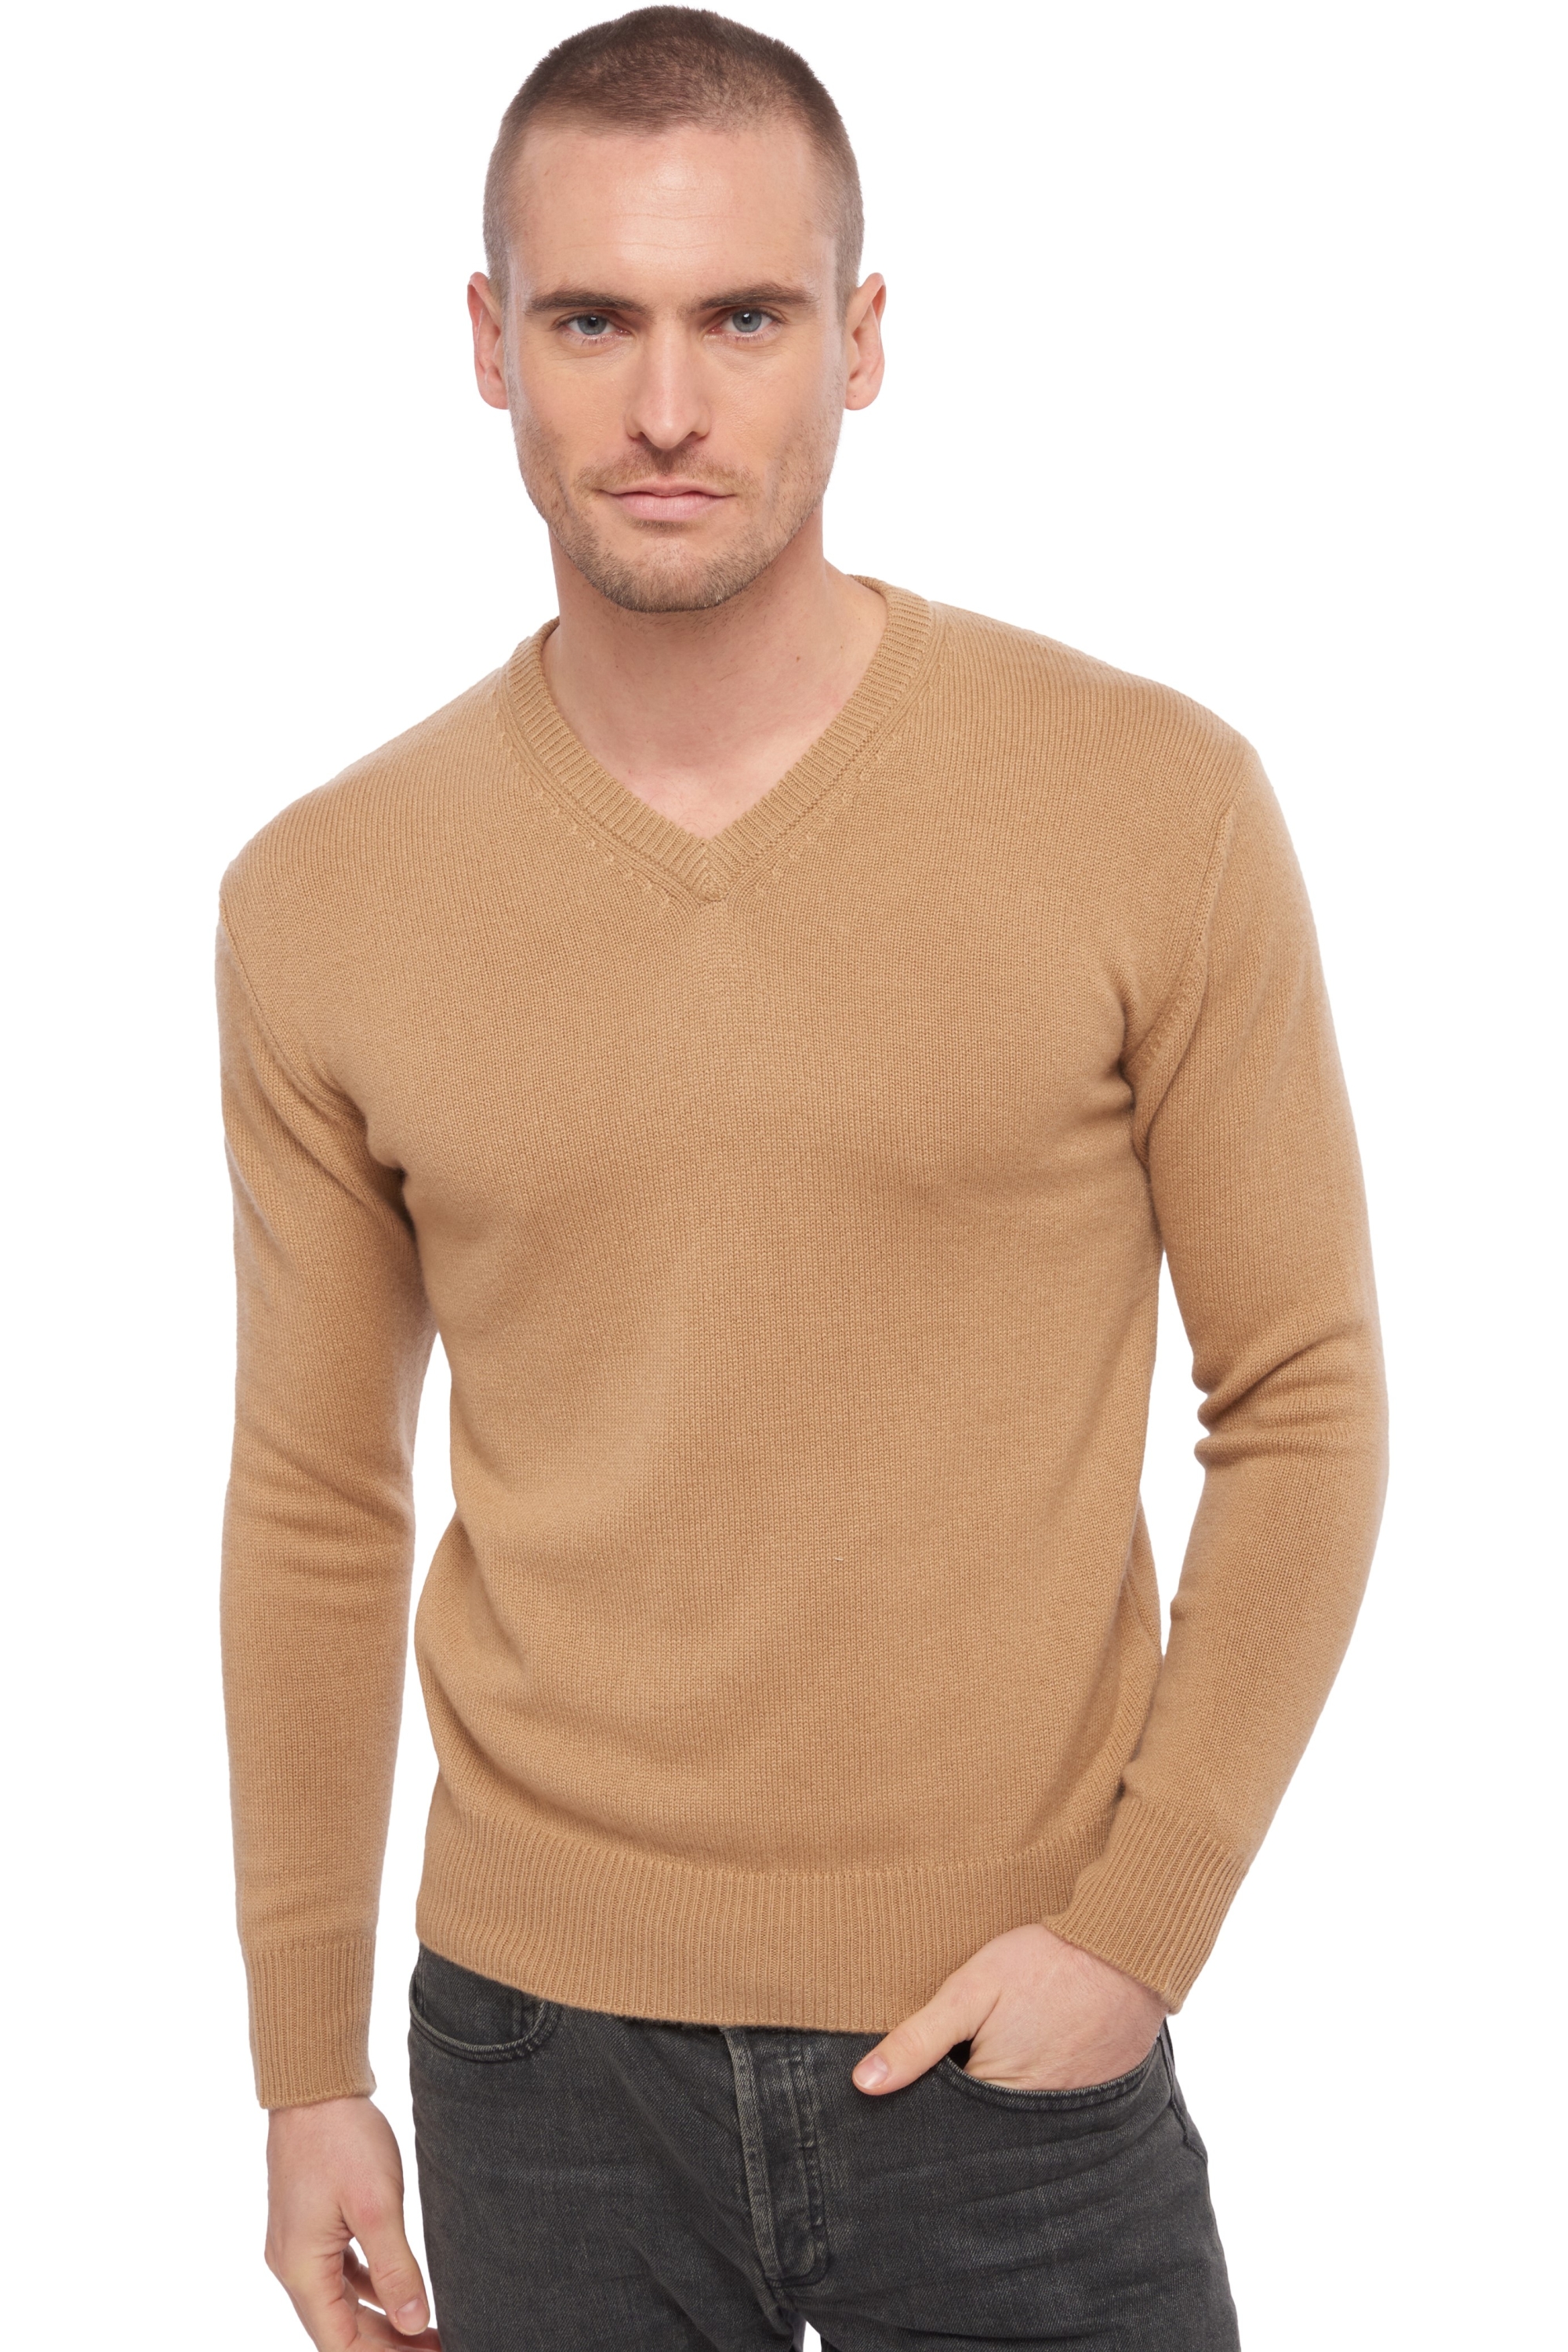 Cachemire pull homme hippolyte 4f camel s